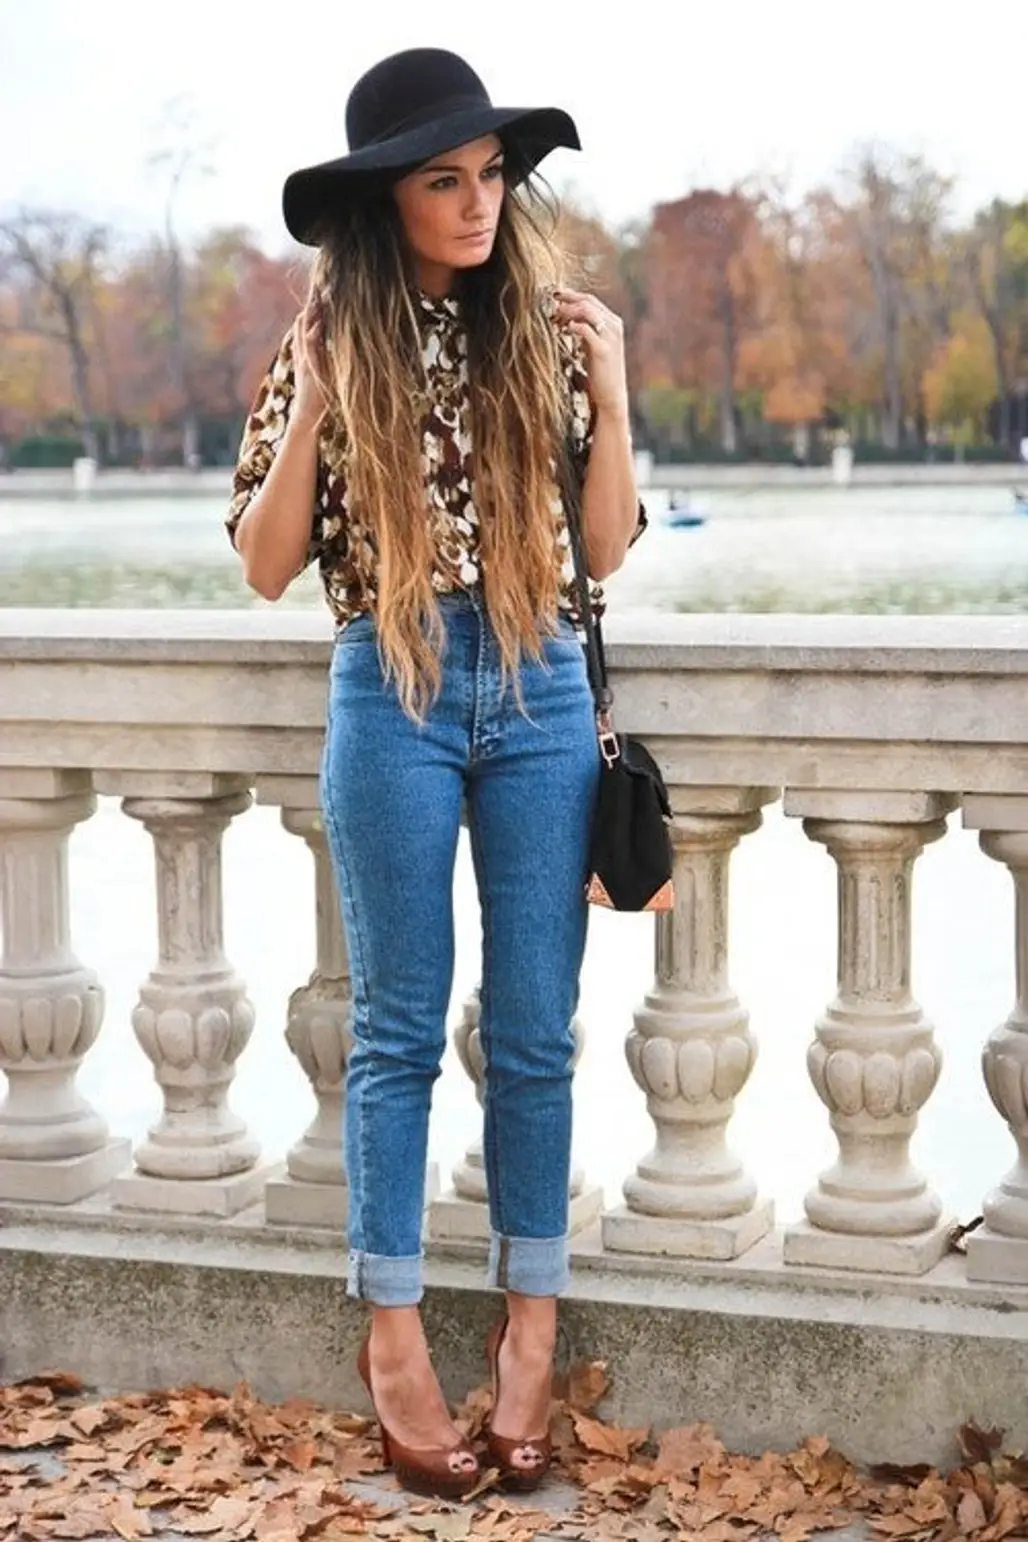 With High-waisted Jeans